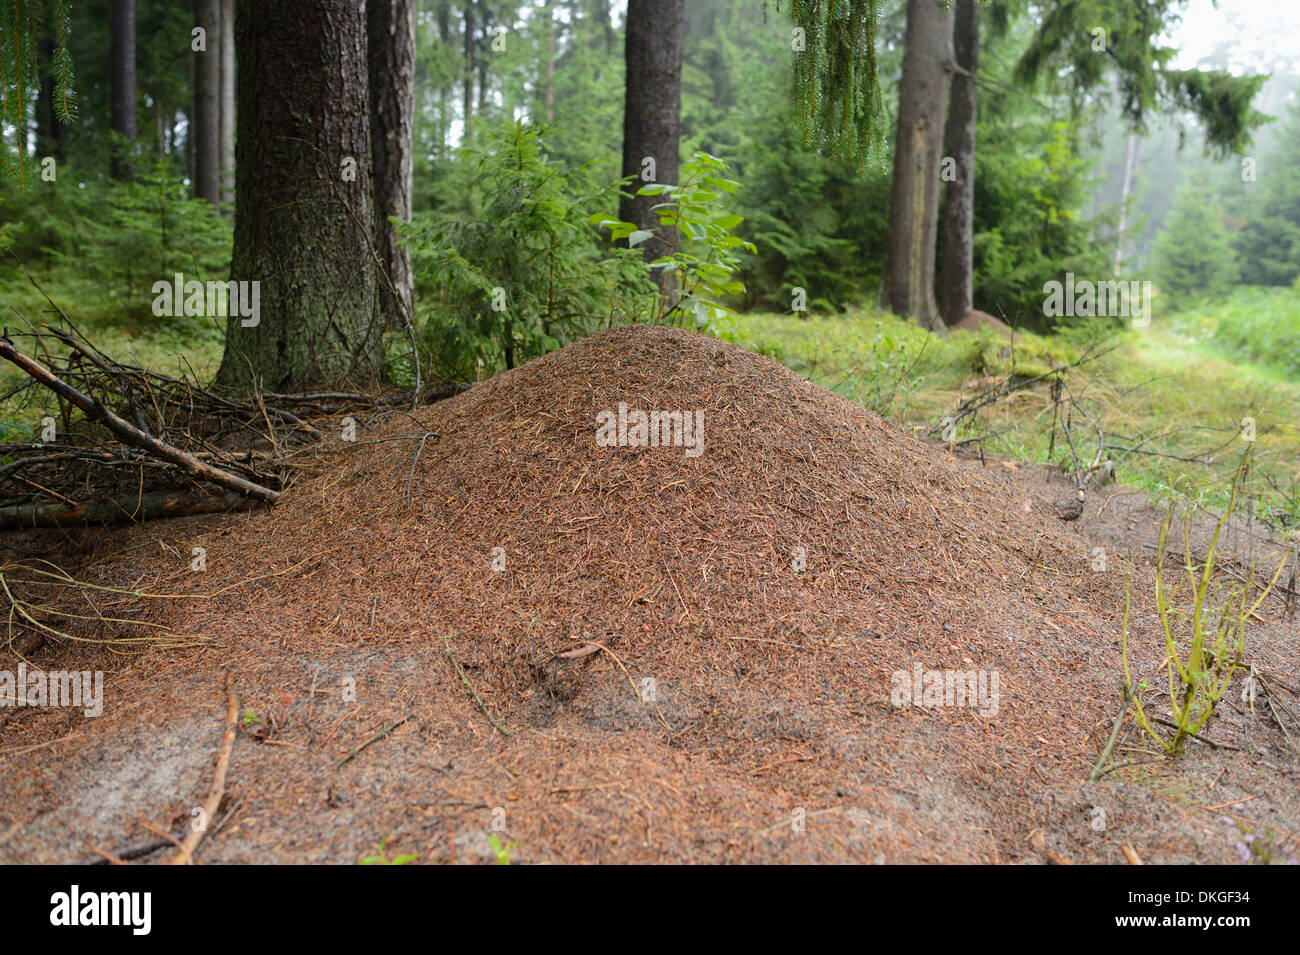 Anthill from wood ants (Formica) in a forest Stock Photo